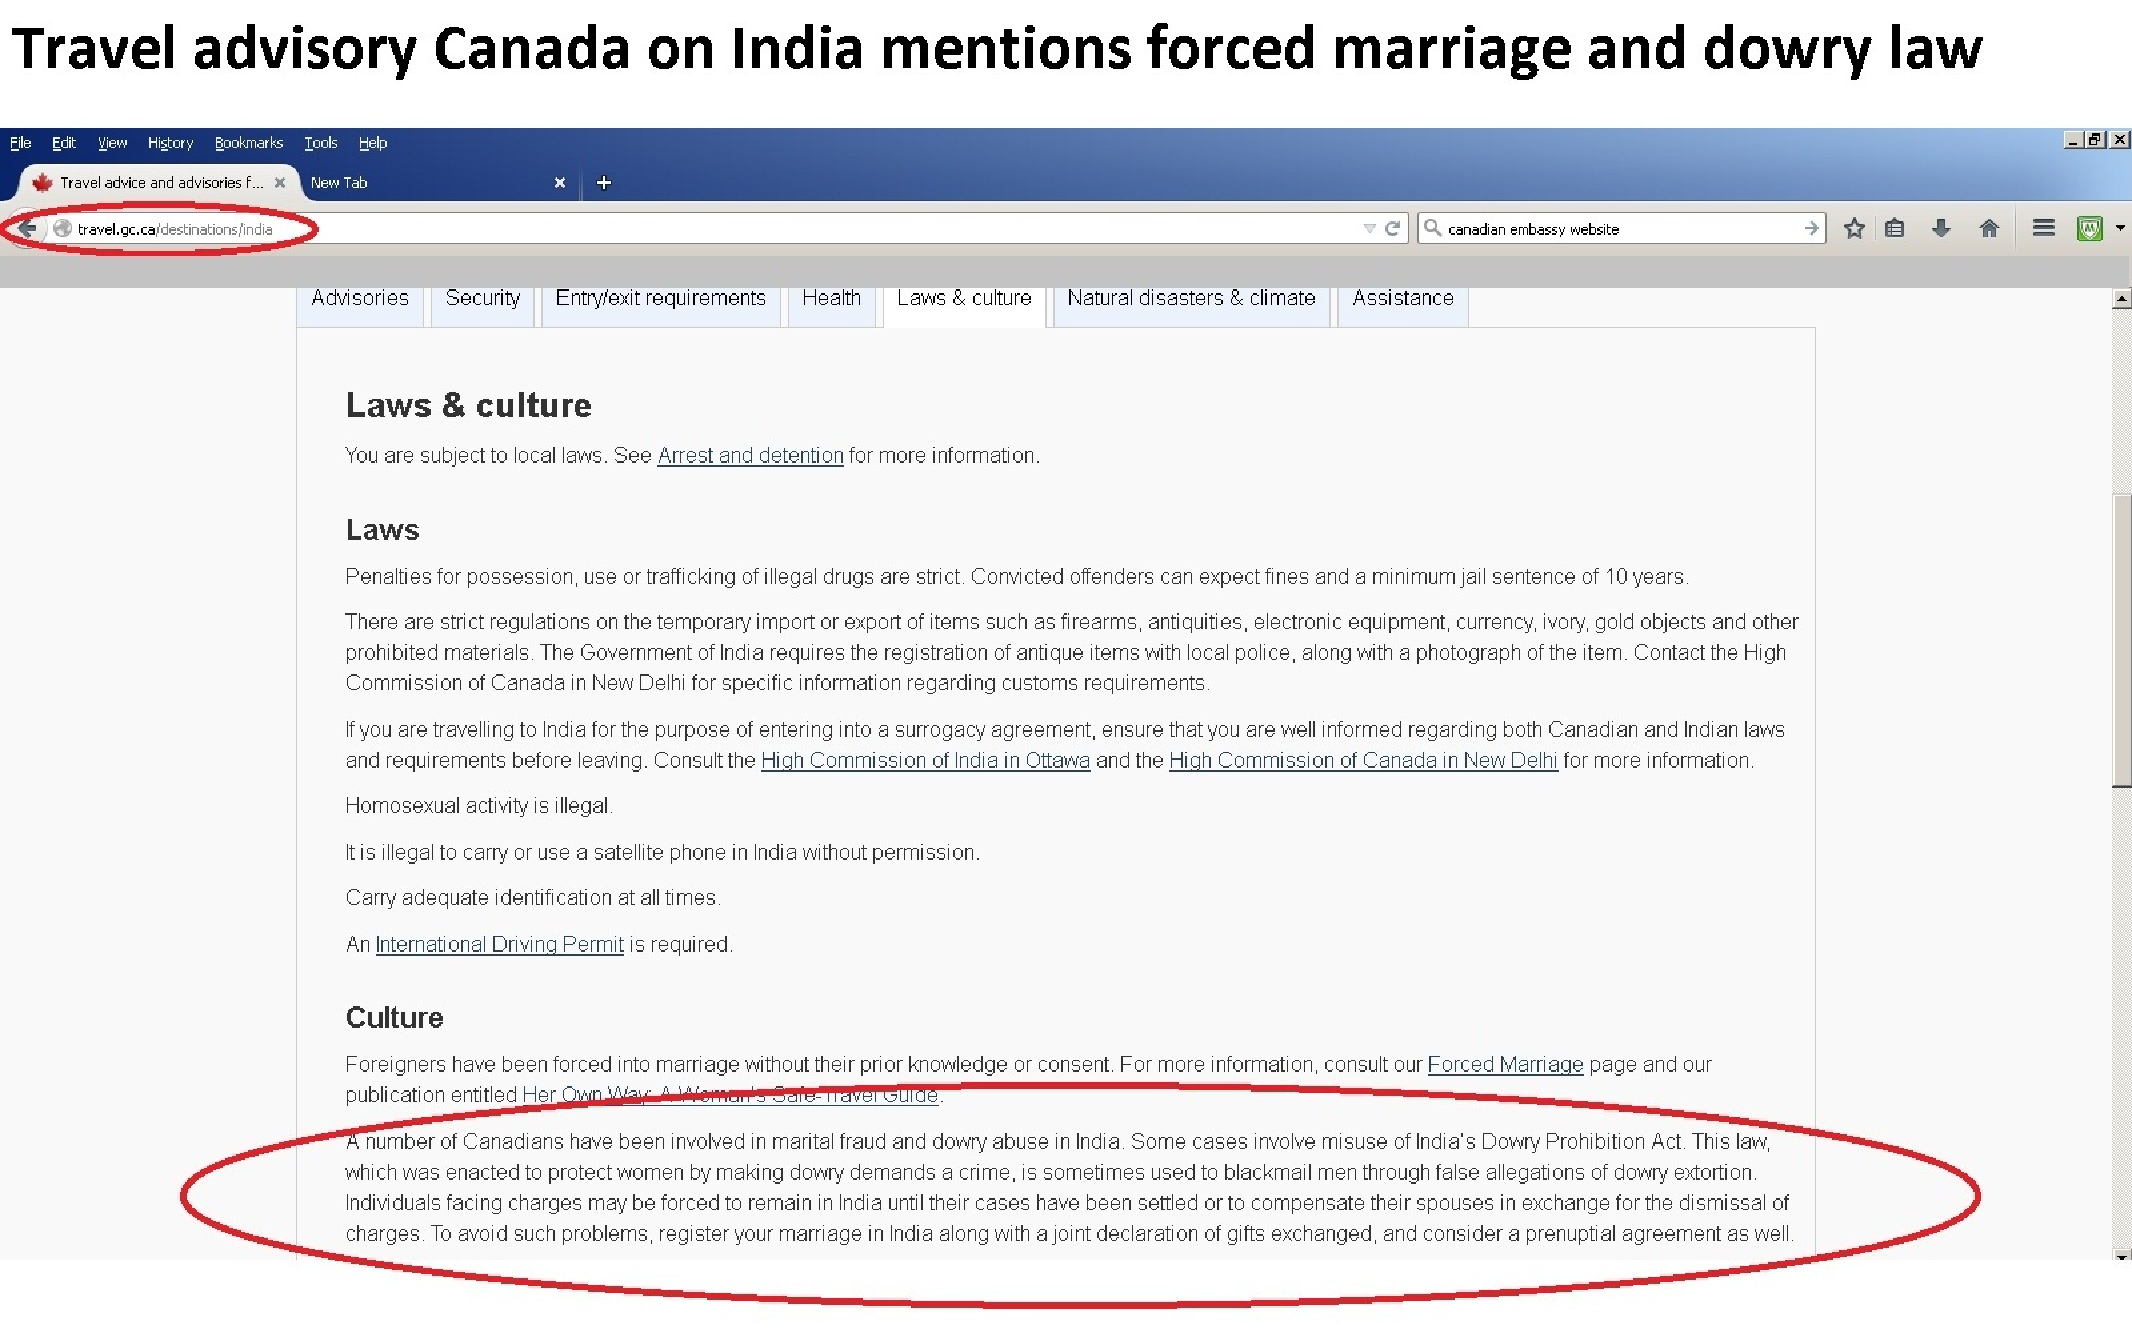 Travel Advisory of Canada on Forced marriage in India